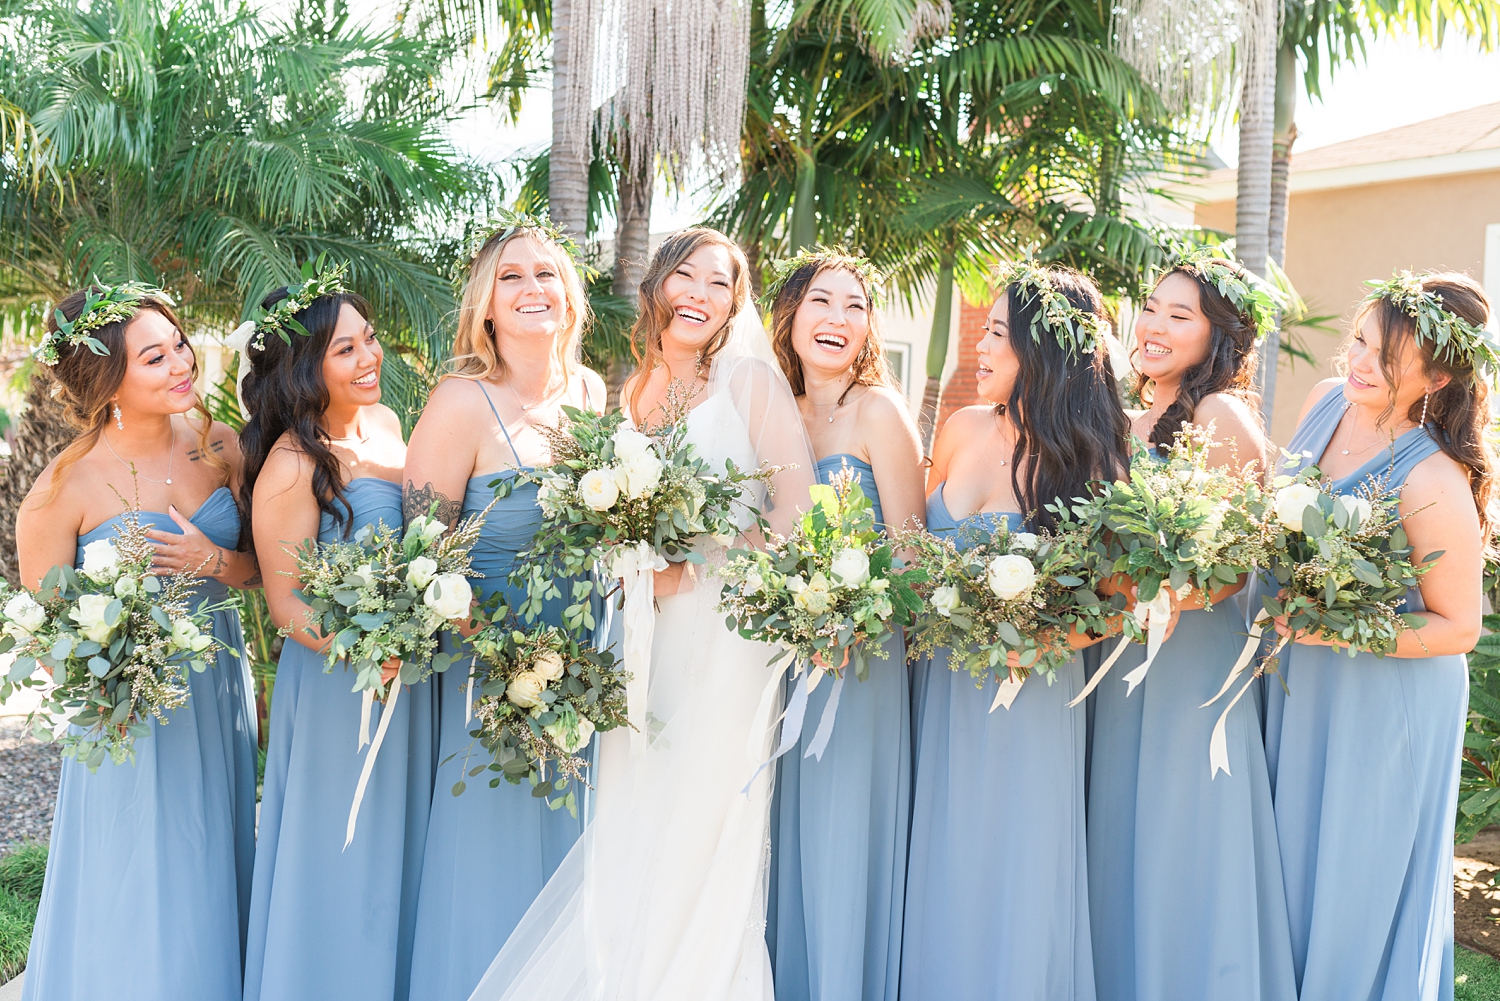 bridesmaids laughing with blue bridesmaid dresses and natural bouquets  bridal party photos